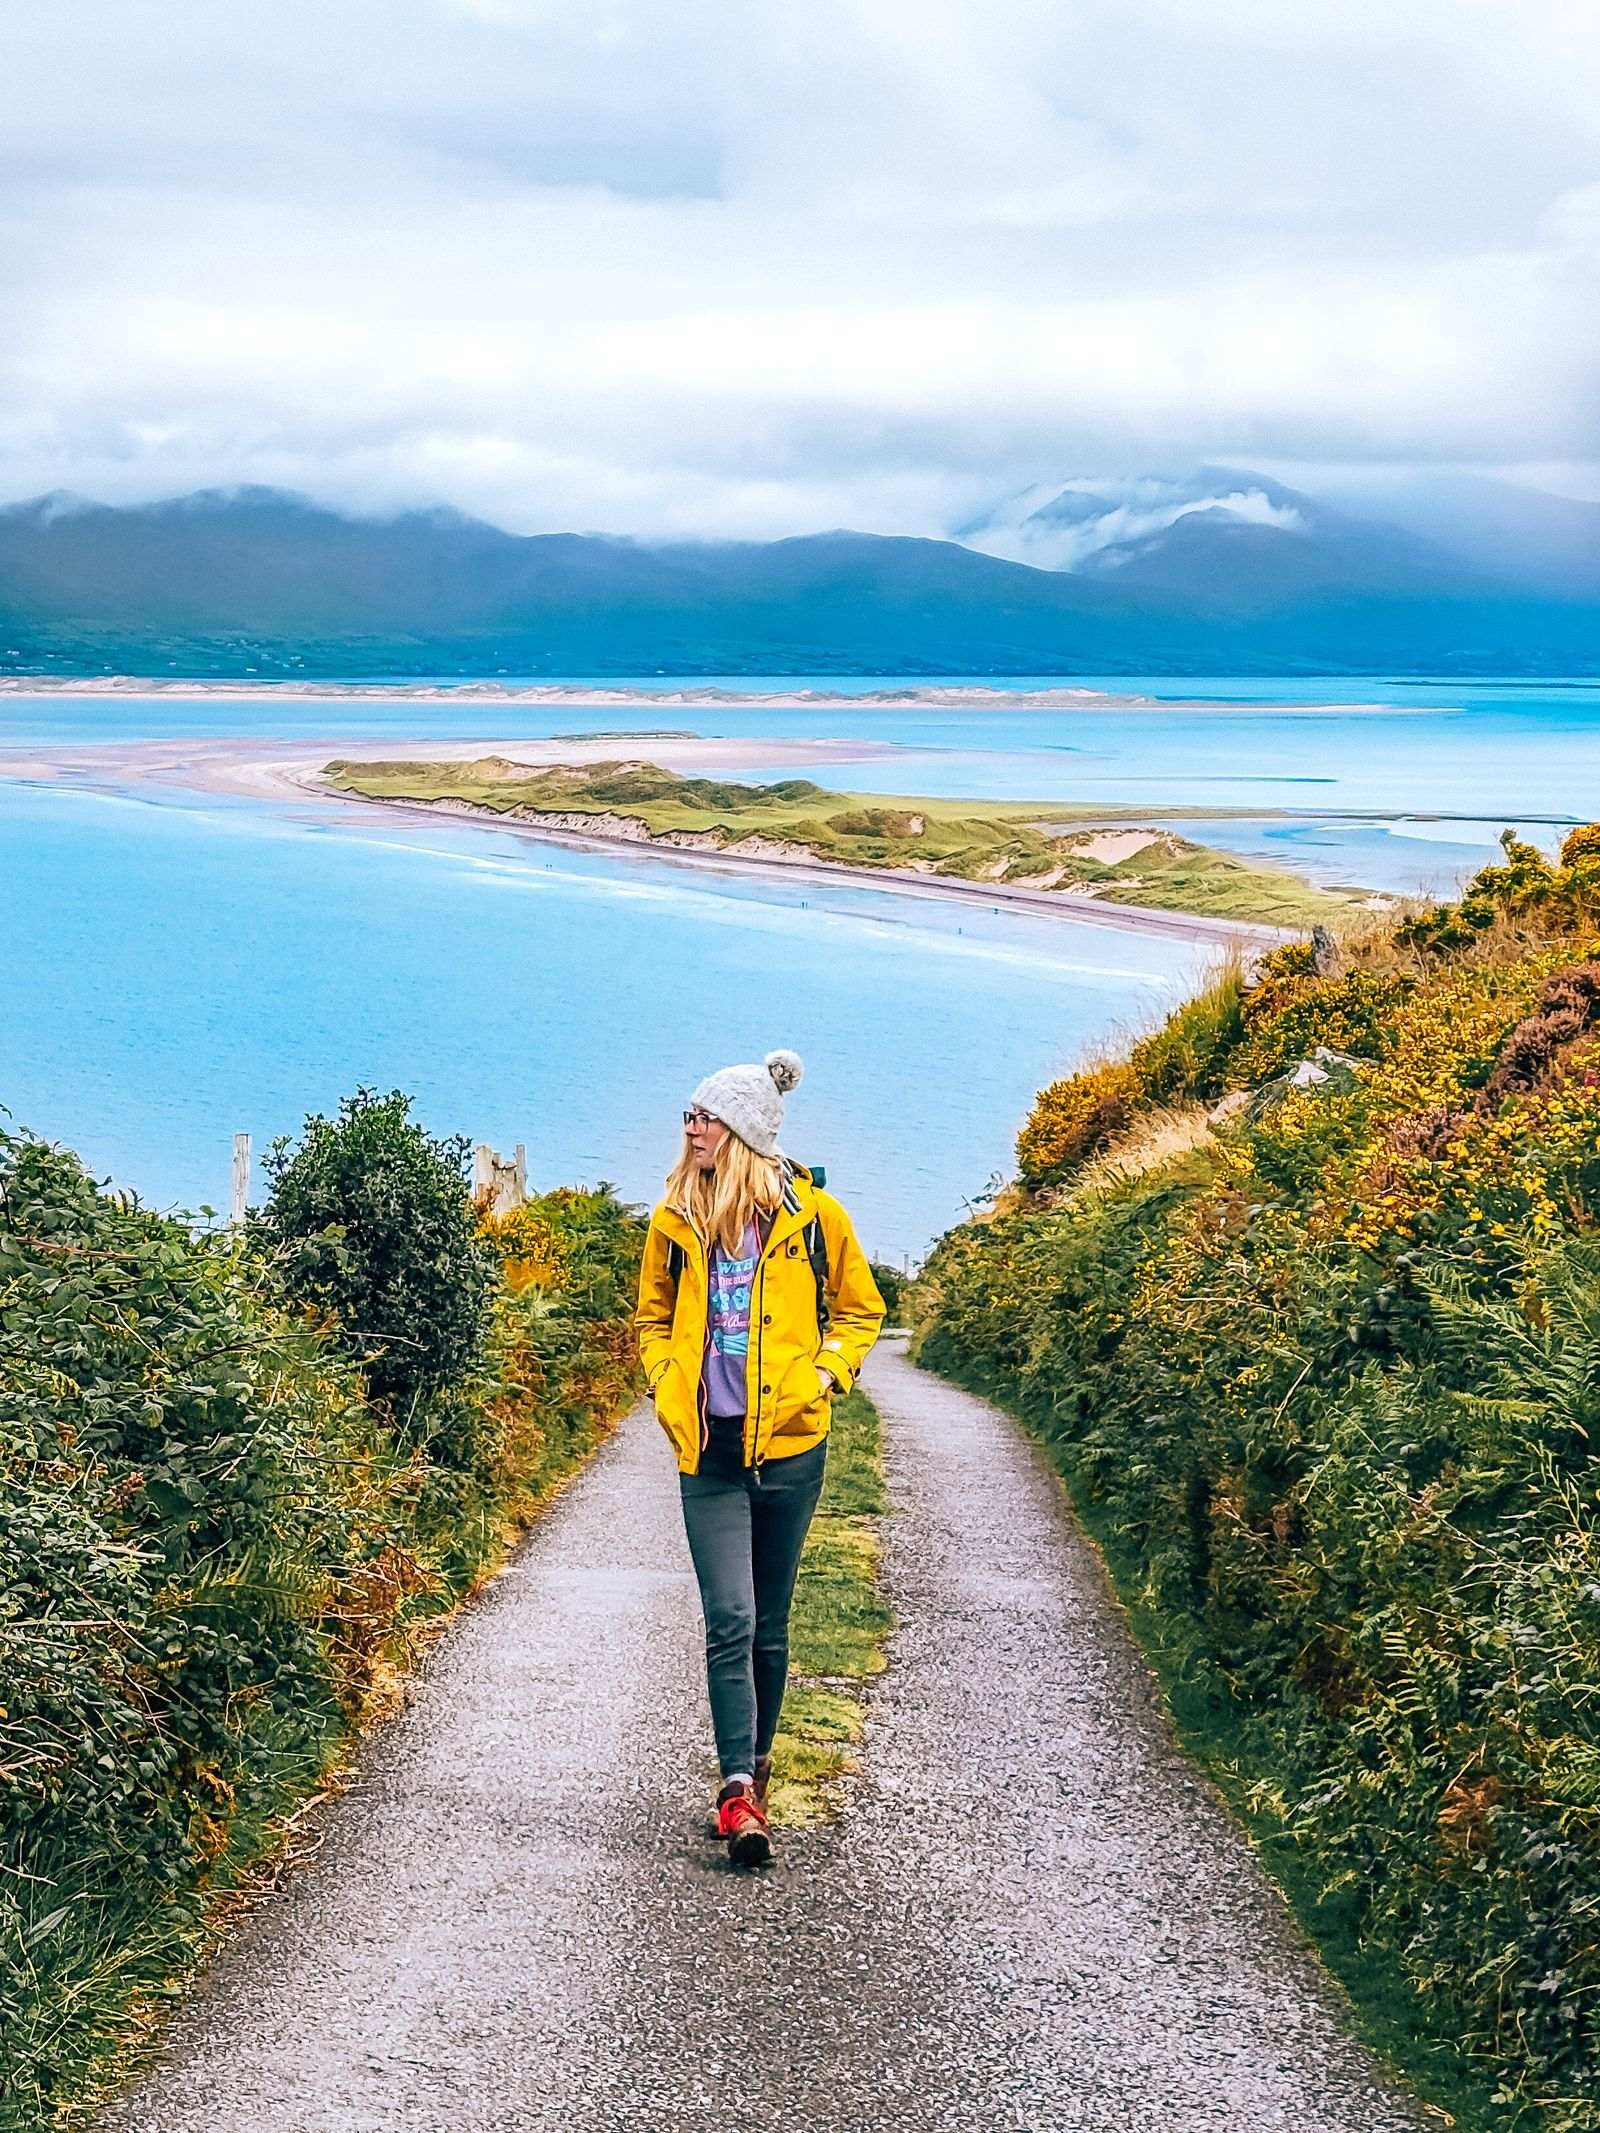 Girl walking down paved Road with the ocean on the background